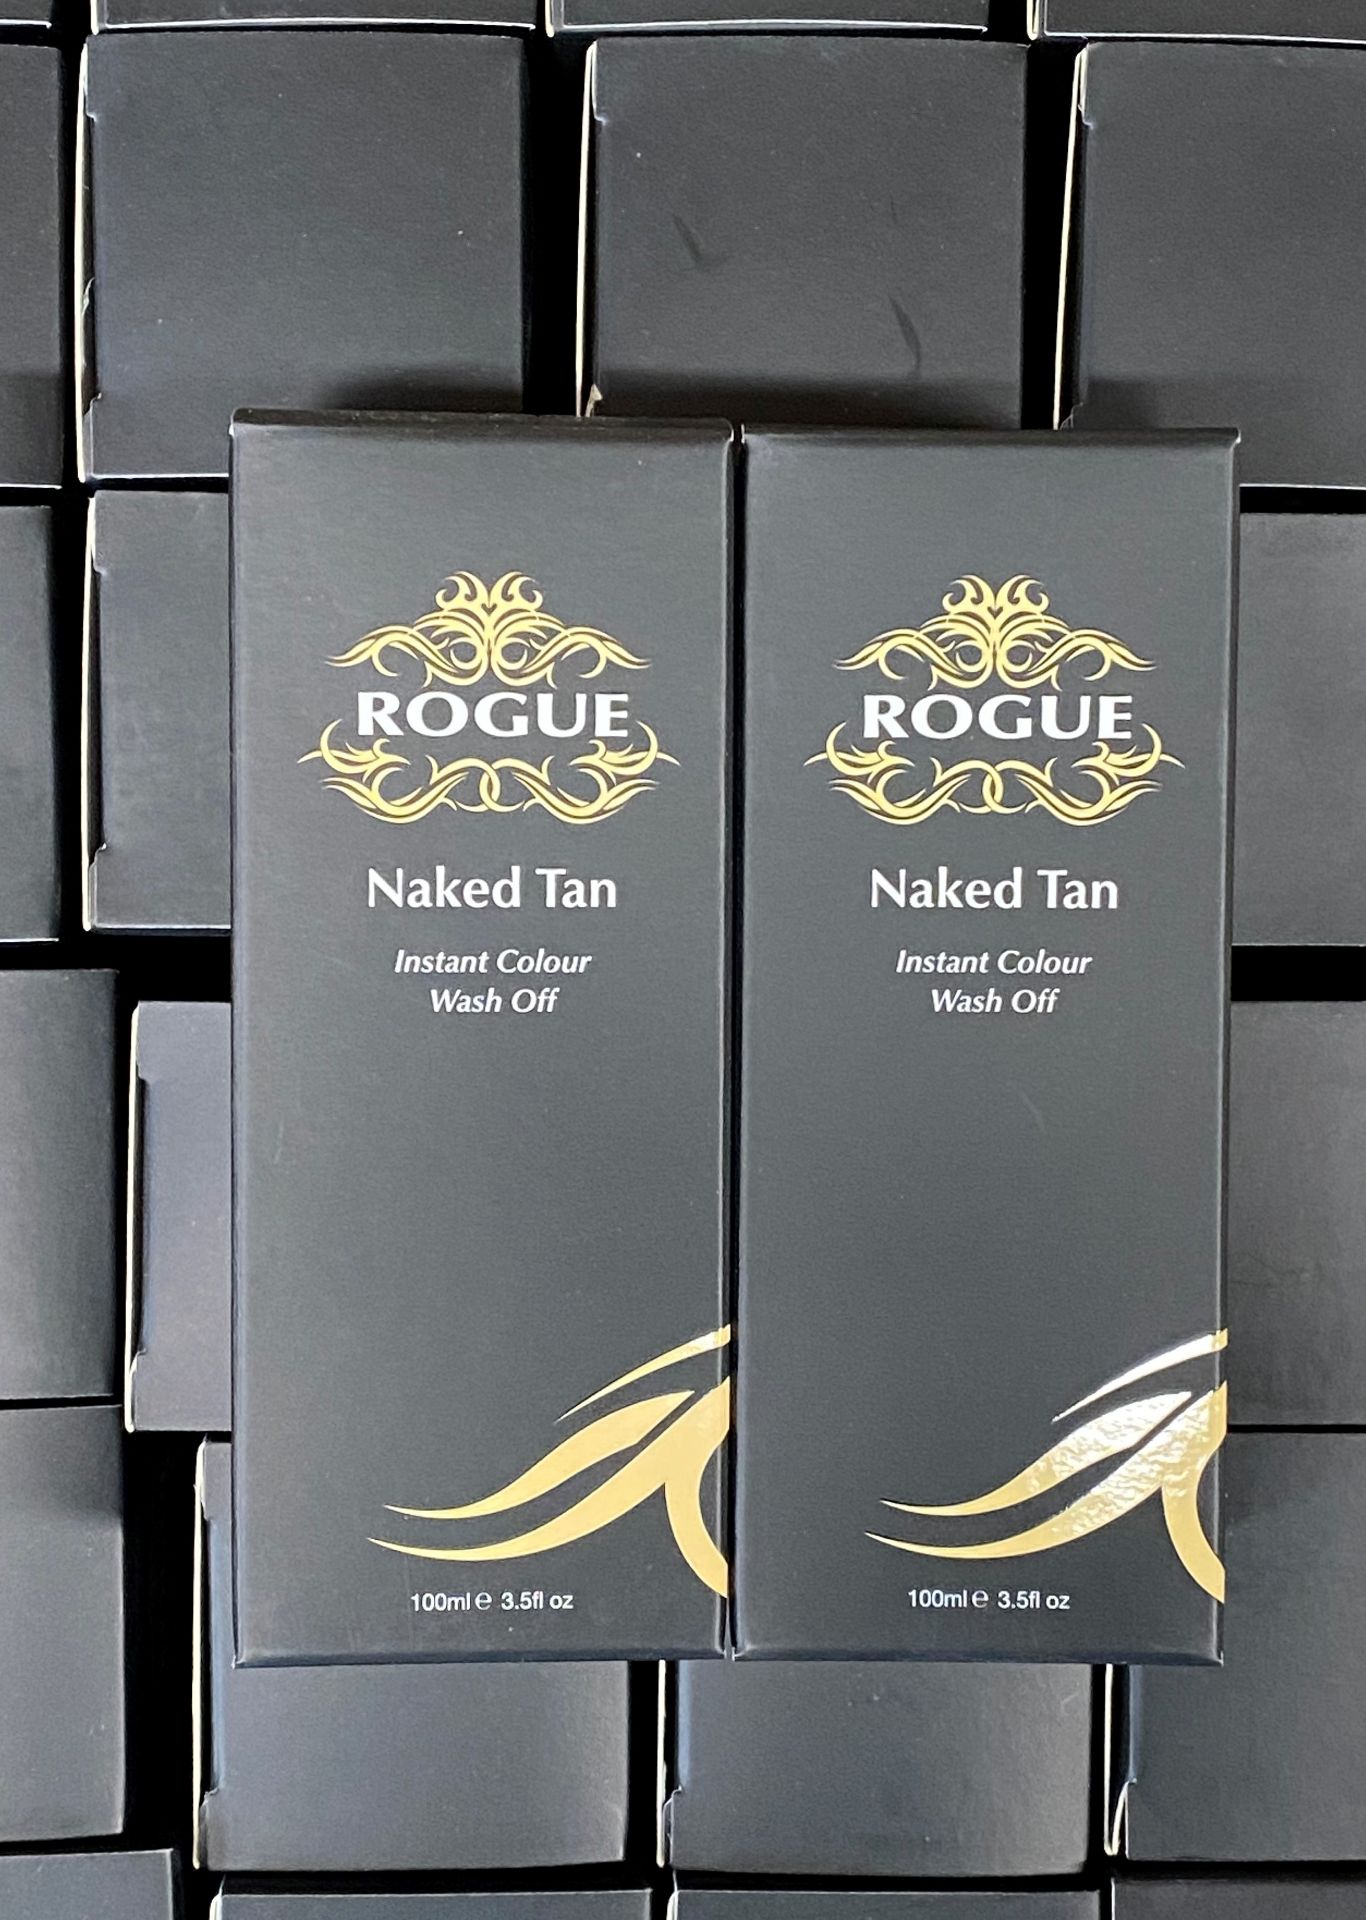 80 x Rogue Naked Tan 100ml tubes (Counts are approximate)